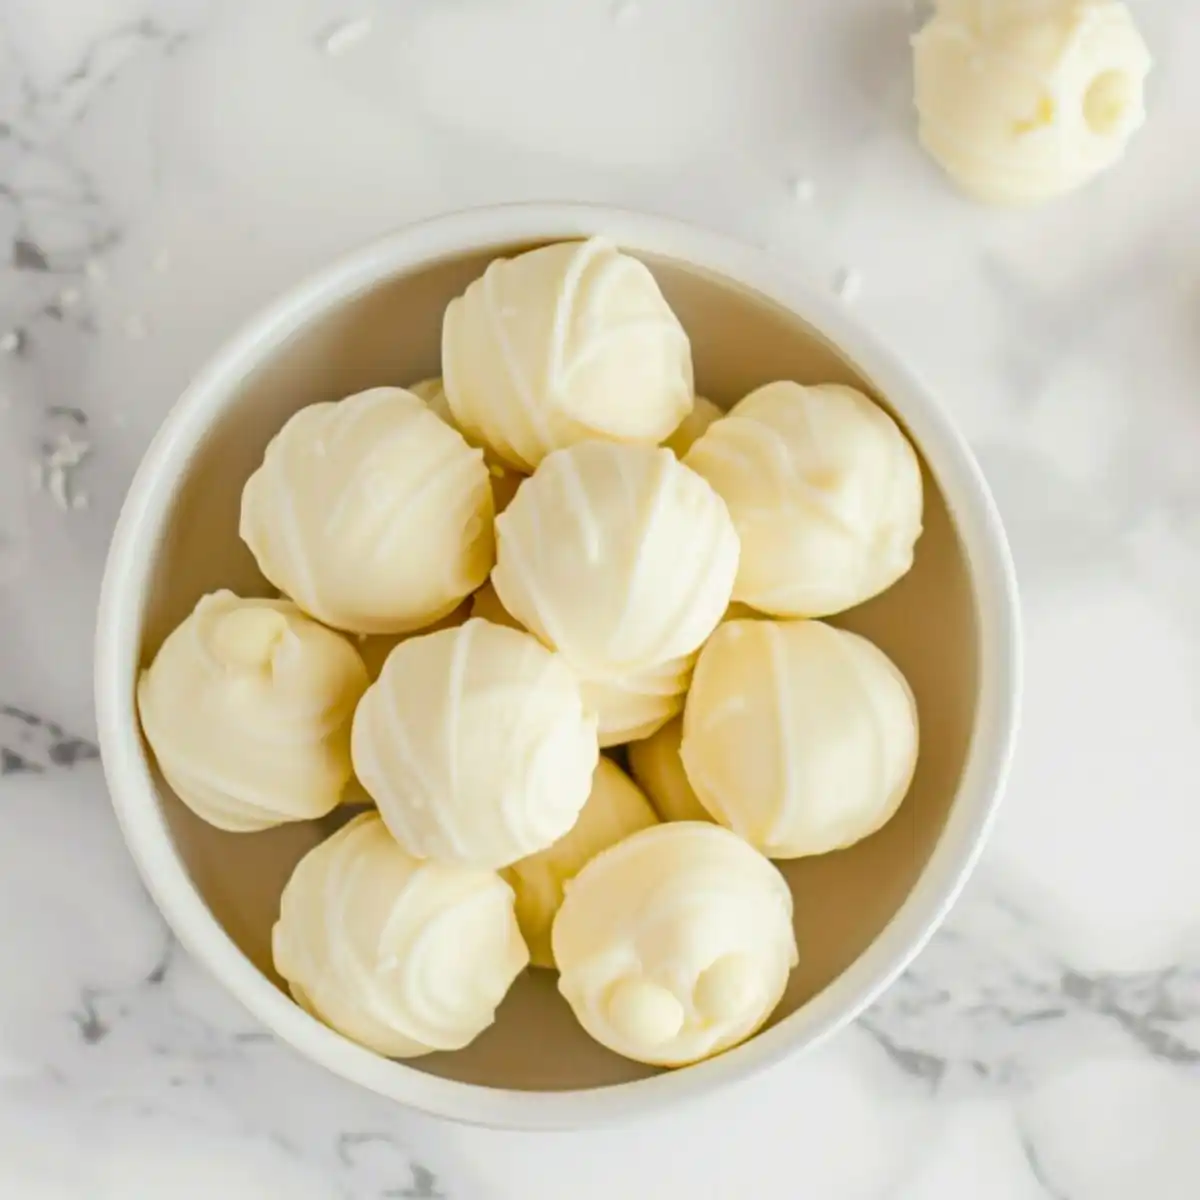 Top view of white chocolate truffles in a bowl.